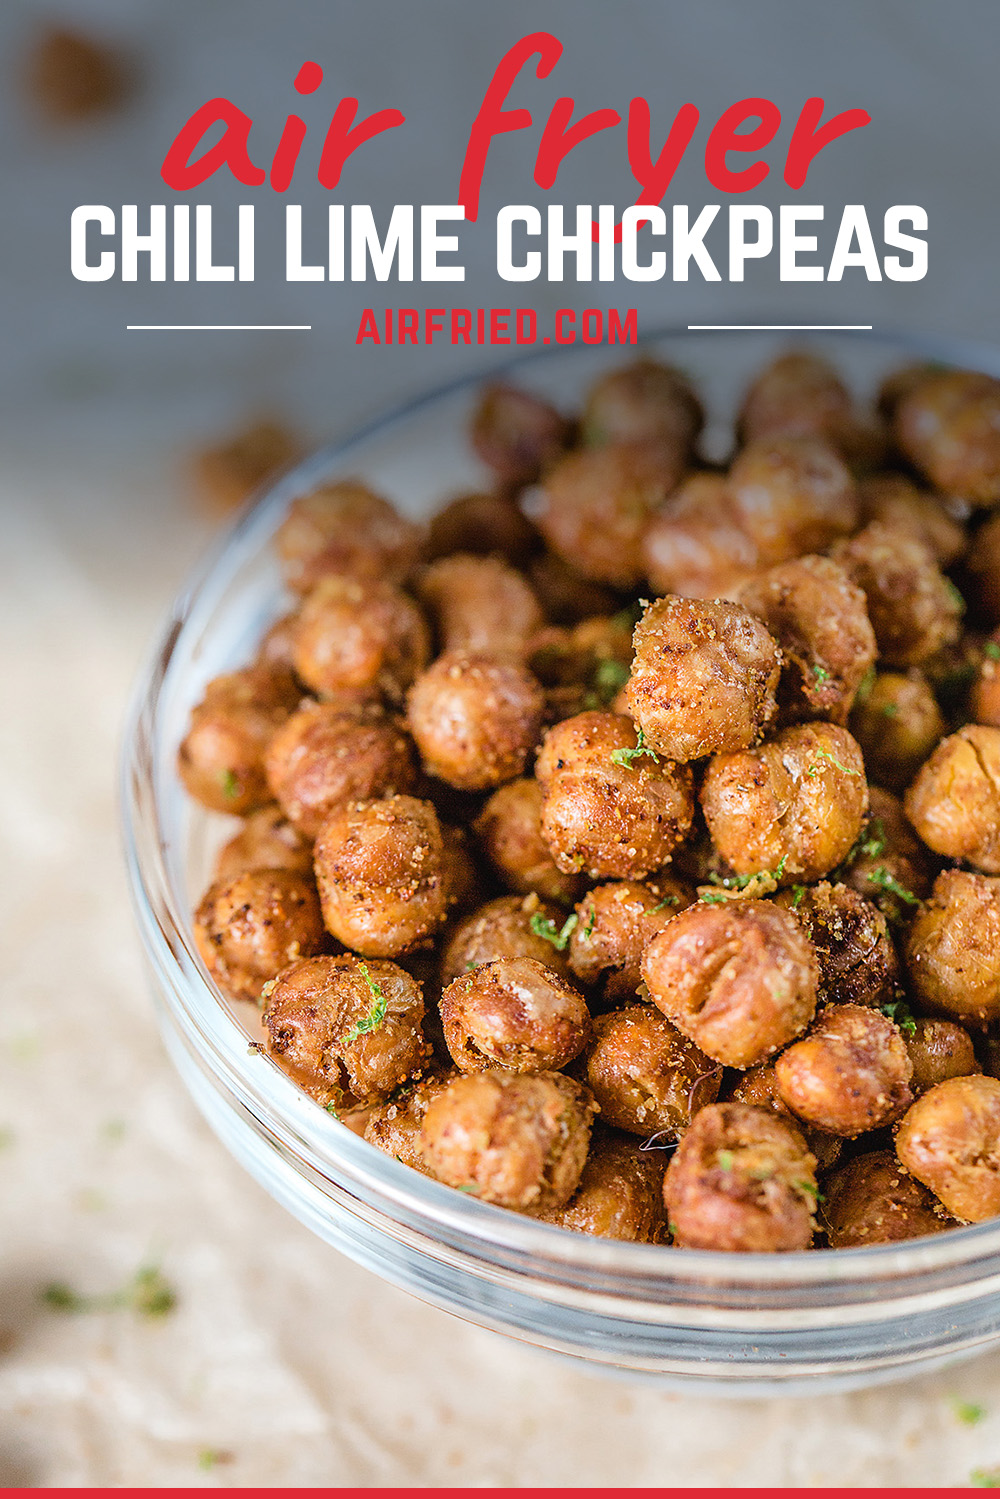 These chickpeas are coated with a chile-lime seasoning and thrown in the air fryer for a crispy finish!  #healthysnacks #airfried #recipe